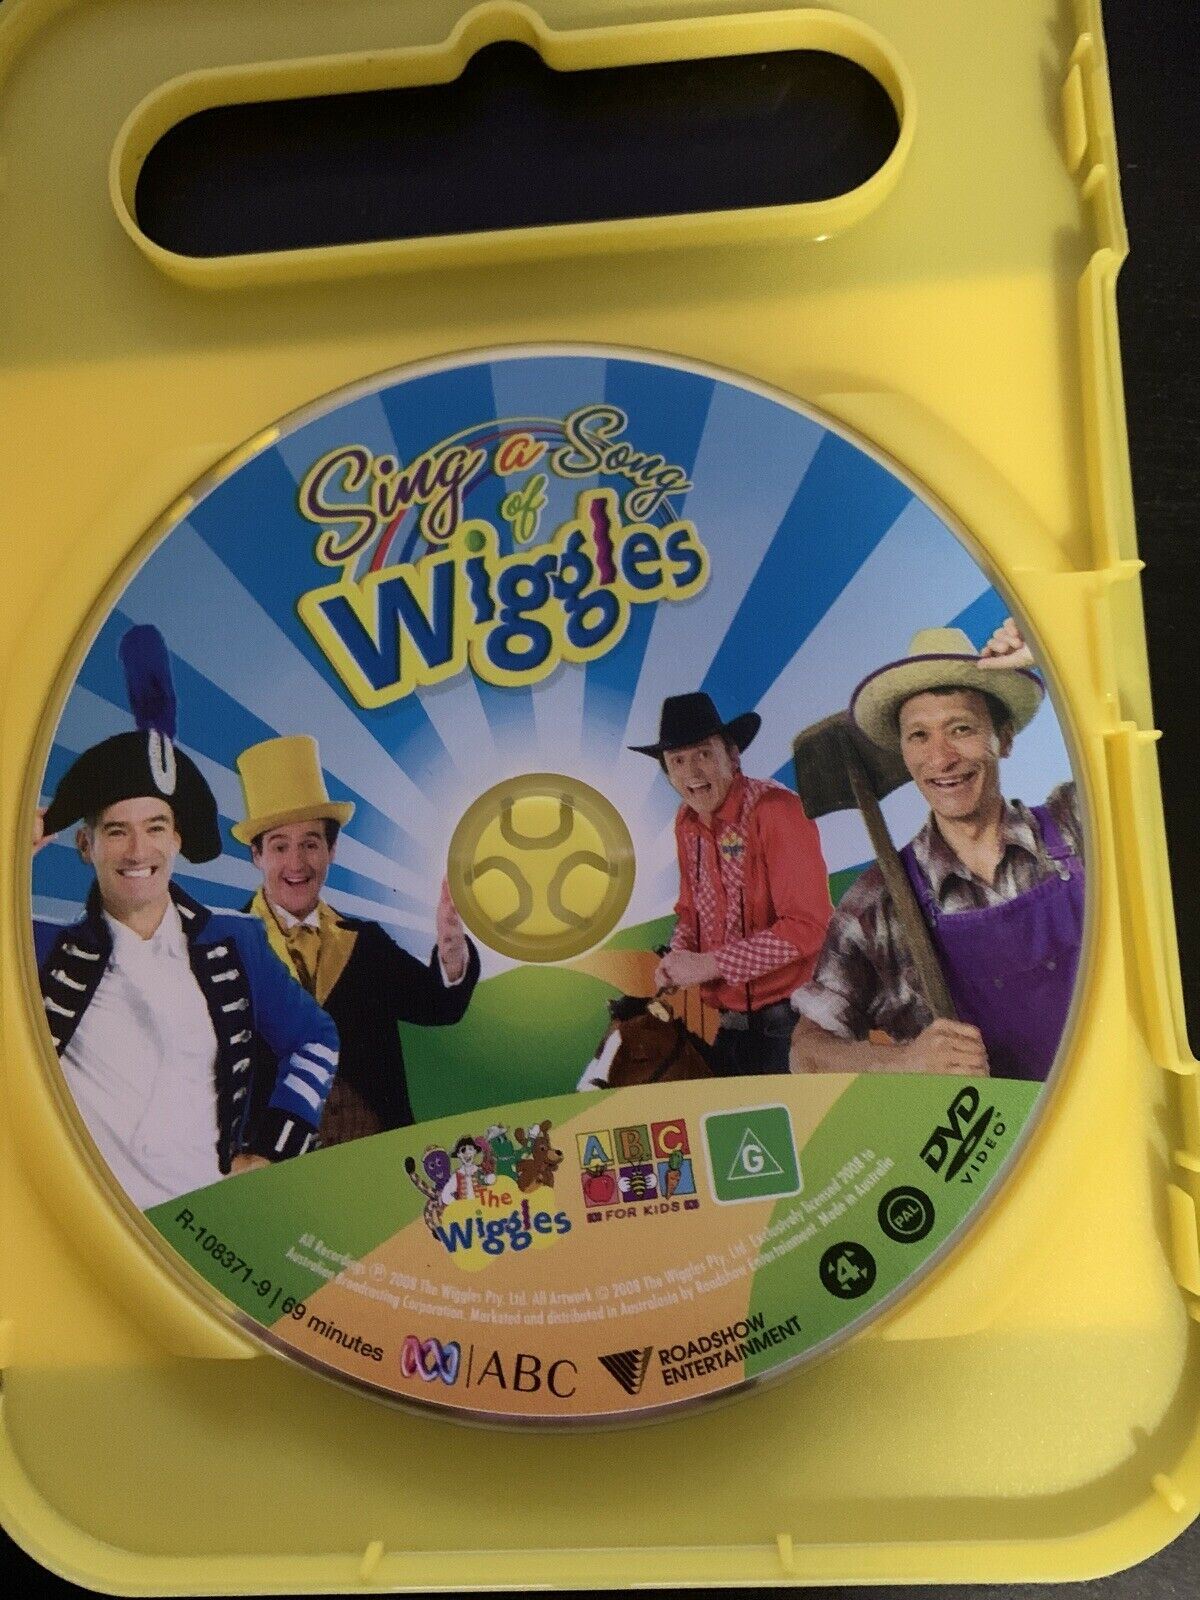 The Wiggles - Sing A Song Of Wiggles (DVD, 2008) Region 4